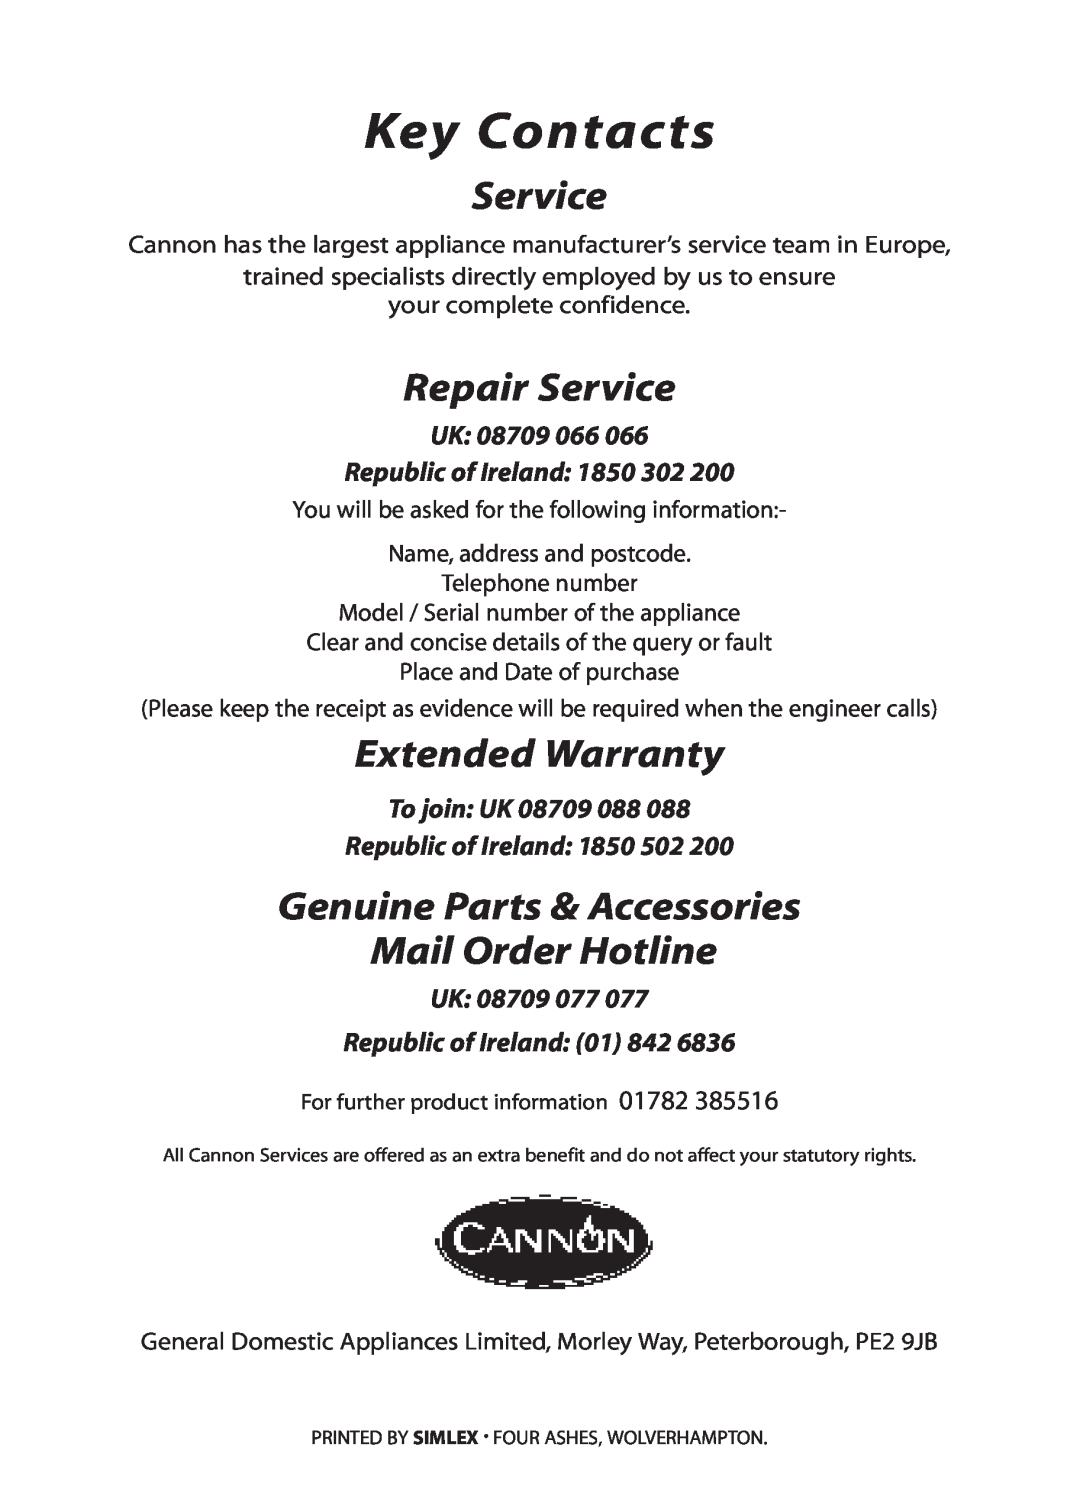 Cannon 10526G, 10525G Key Contacts, Repair Service, Extended Warranty, Genuine Parts & Accessories Mail Order Hotline 